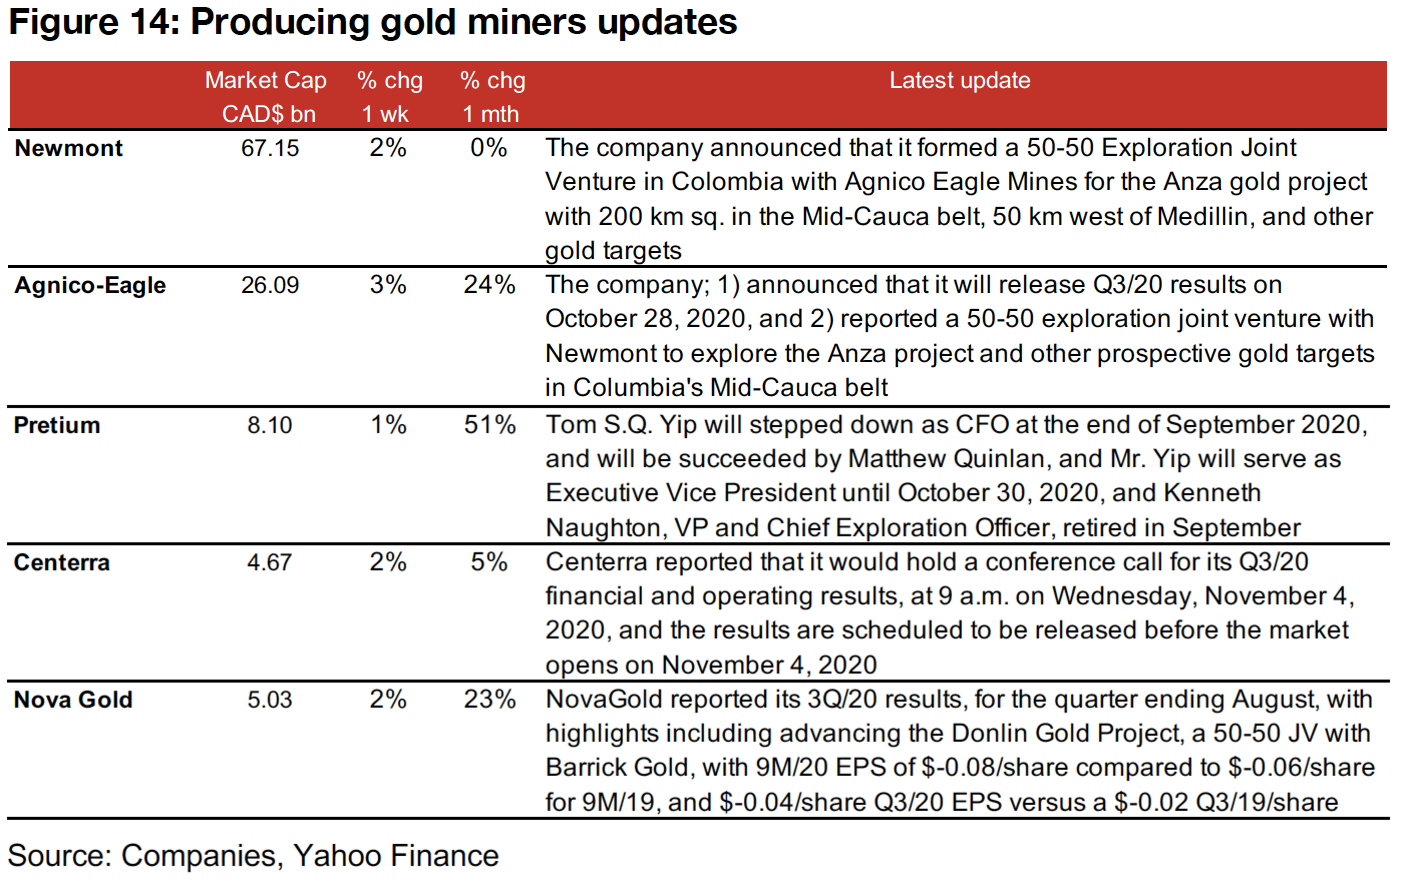 Producing gold miners rebound